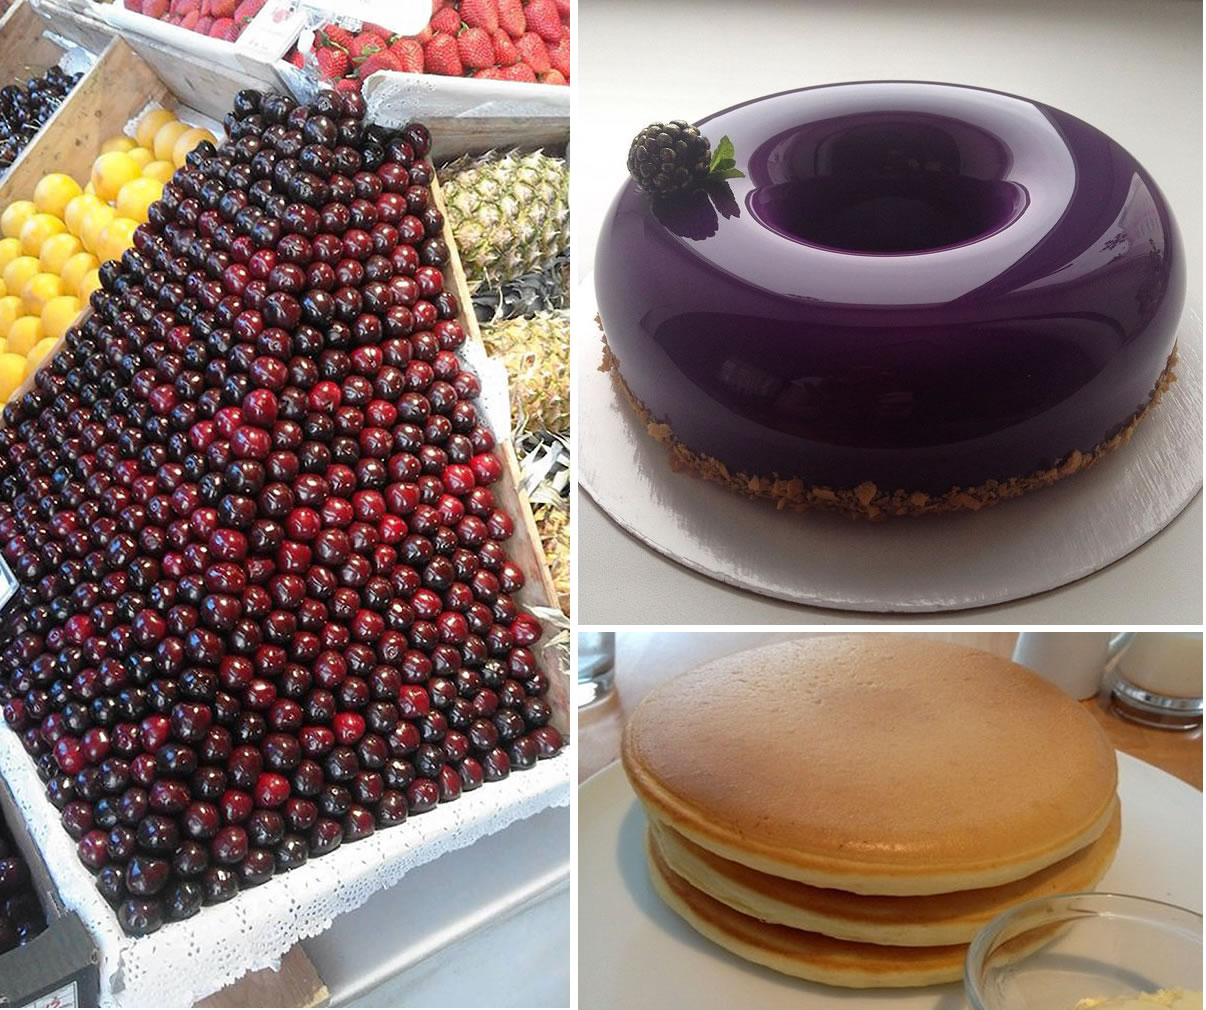 See This 14 Totally Perfect Food Photos And You Are Ready To Die :D